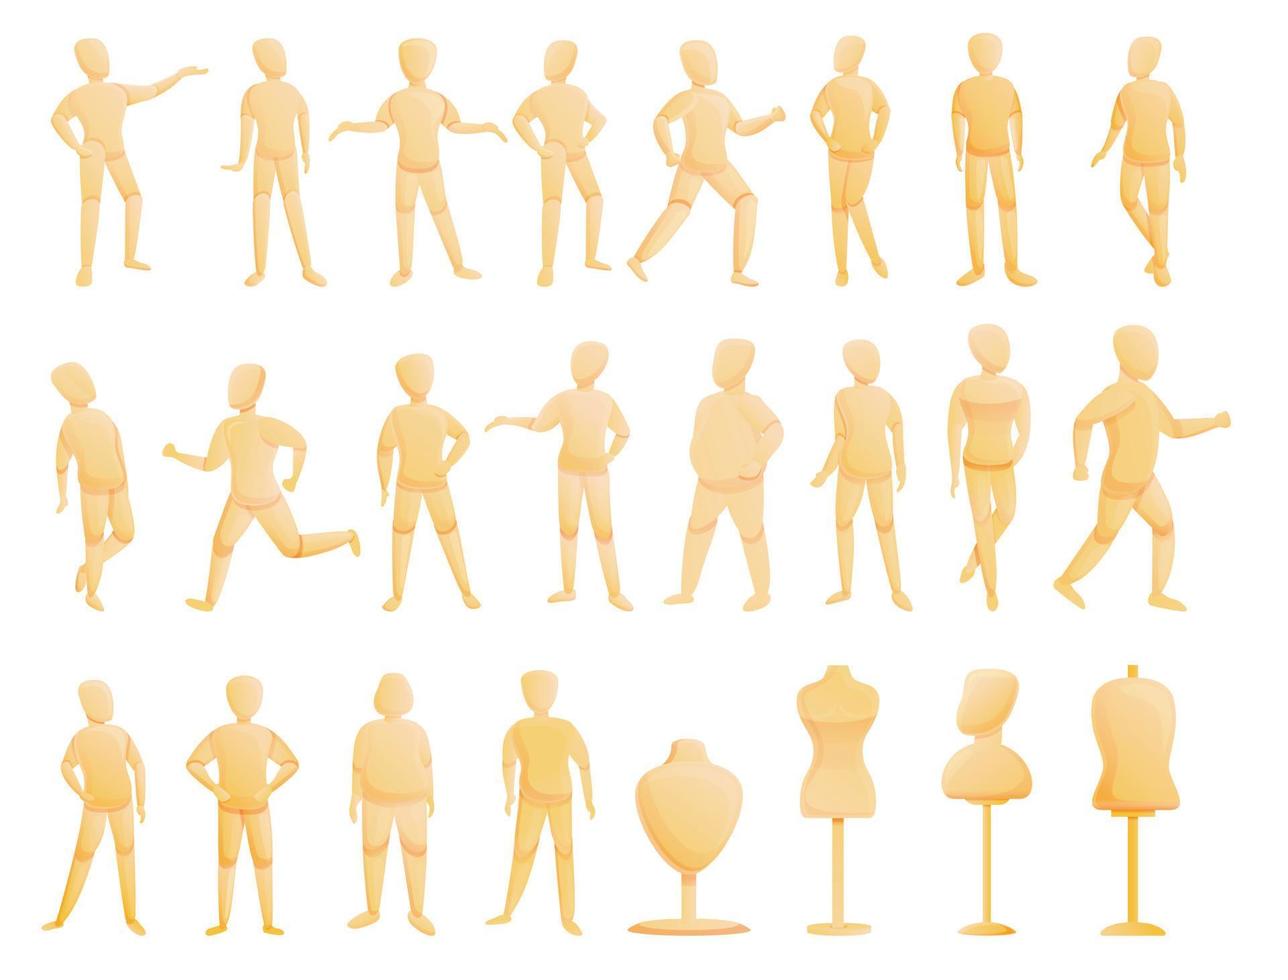 Mannequin icons set, cartoon style vector